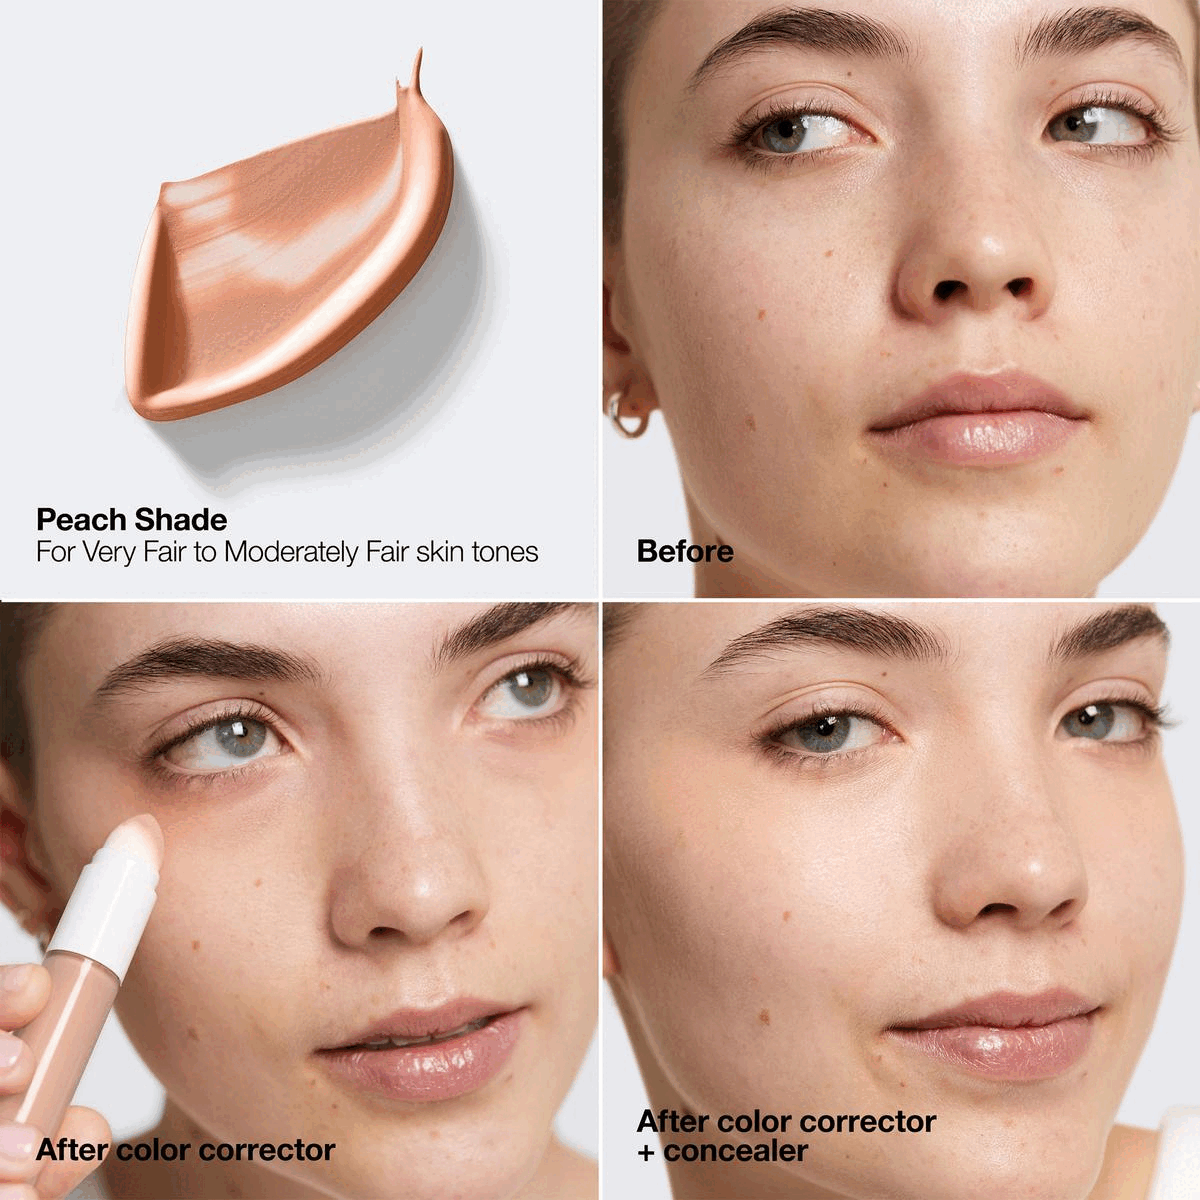 Image 1, showing a swatch of the product and before and after use. Text, peach shade, for very fair to moderately fair skin tones, before, after colour corrector, after colour corrector and concealer Image 2, showing a swatch of the product and before and after use. Text, Apricot Shade, for medium to deep skin tones, before, after colour corrector, after colour corrector and concealer Image 3, Vitamin C and niacinamide help visibly brighten skin tone. Hyaluronic acid helps hydrate and plump fine, dry lines. Caffeine and phytosphingosine are known to help energize skin and reduce undereye puffiness. Image 4, 3 steps to flawless coverage. 1. correct 2. conceal. 3. perfect Image 5, chart of product details, even better all over primer and colour corrector, neutralises dark circles and discolouration, all skin types, sheer to moderate 12 hour wear, natural finish, 2 shades. Even better all over concealer and eraser, conceals, brightens and blurs imperfections, all skin types, full 12 hour wear, natural finish, 30 shades 